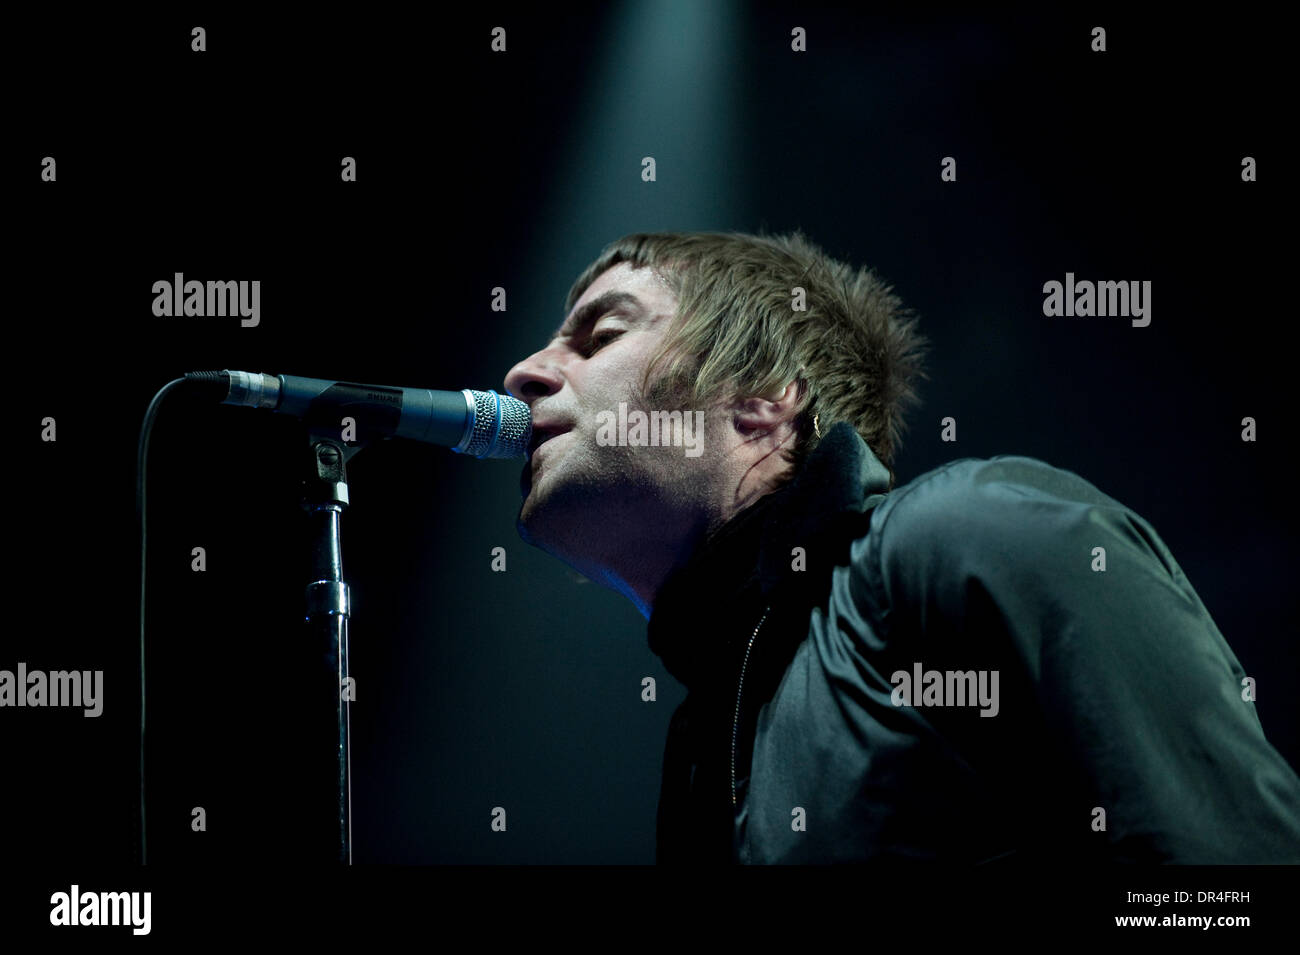 Dec 15, 2008 - London, Ontario, Canada - Singer LIAM GALLAGHER  of Oasis performs during a show at the John Labatt Centre in London. (Credit Image: © Oliver Day/Southcreek EMI/ZUMA Press) Stock Photo